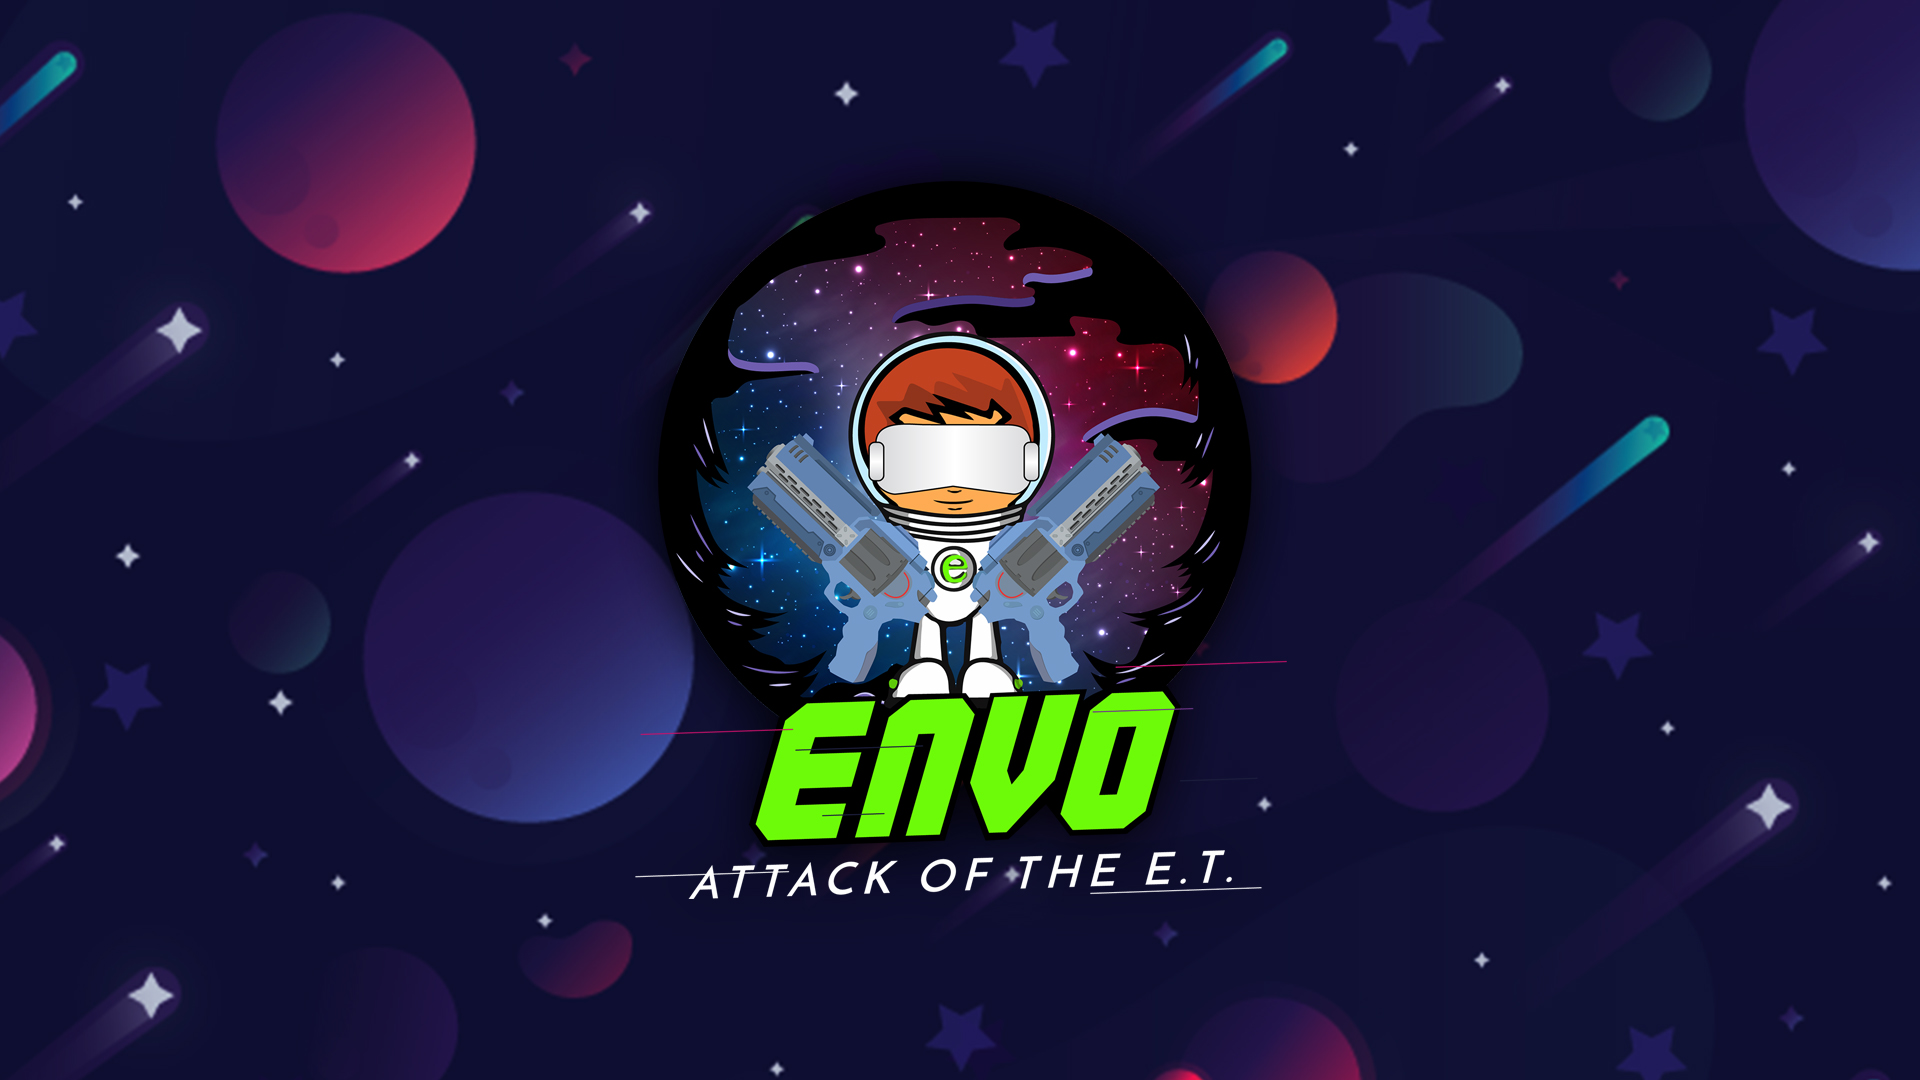 Virtual Reality - Envo: Attack of the E.T.